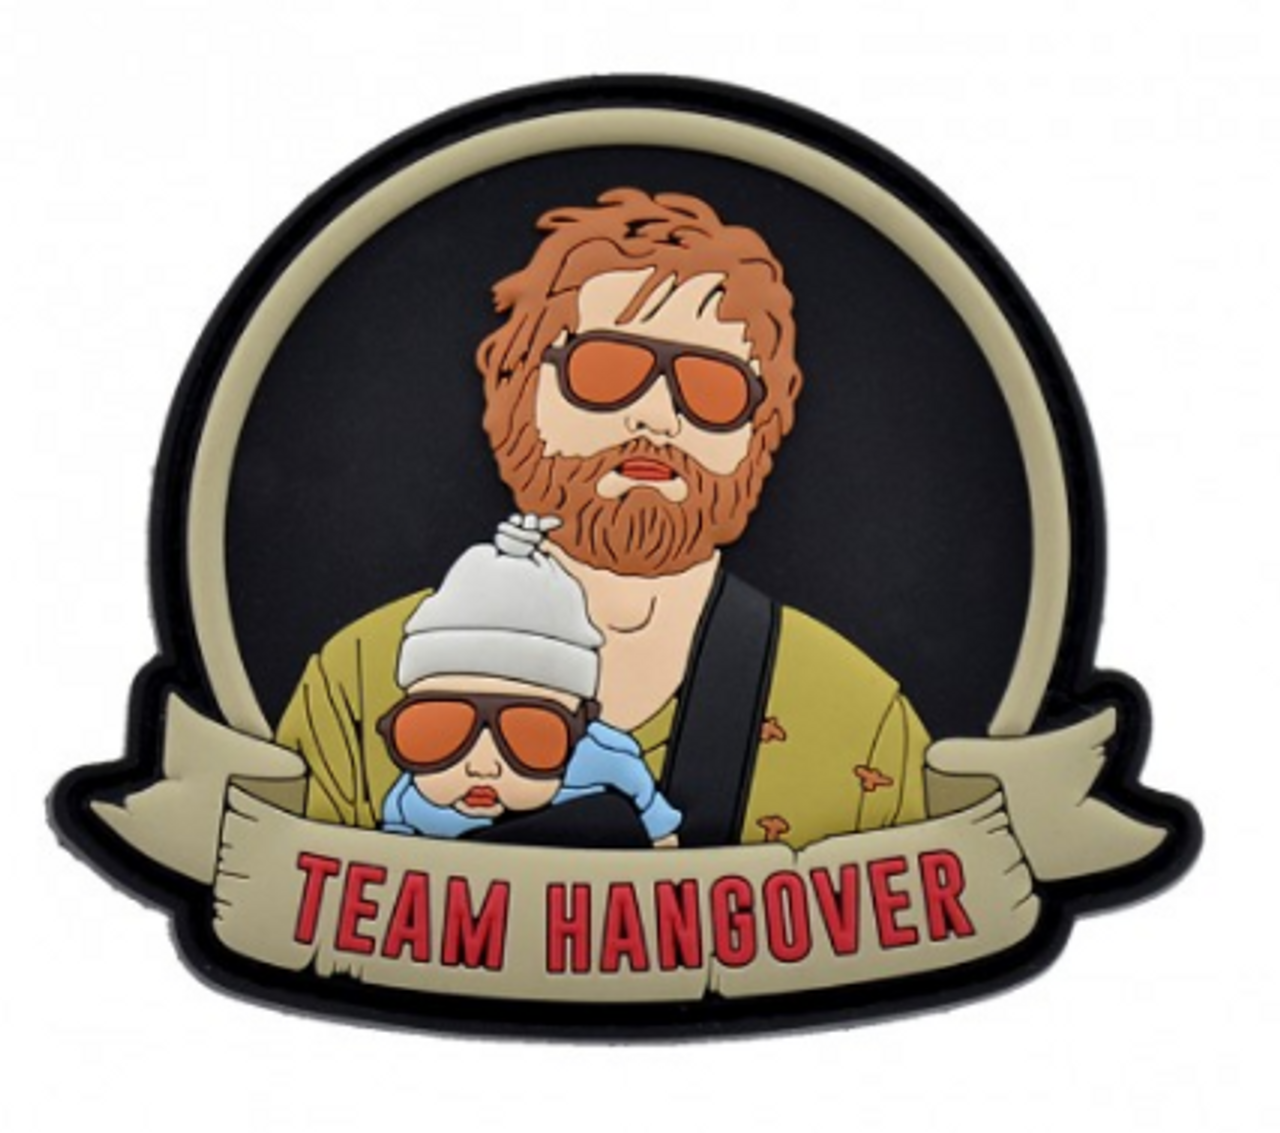 ArtStation - Hangover Patches  A+ Content